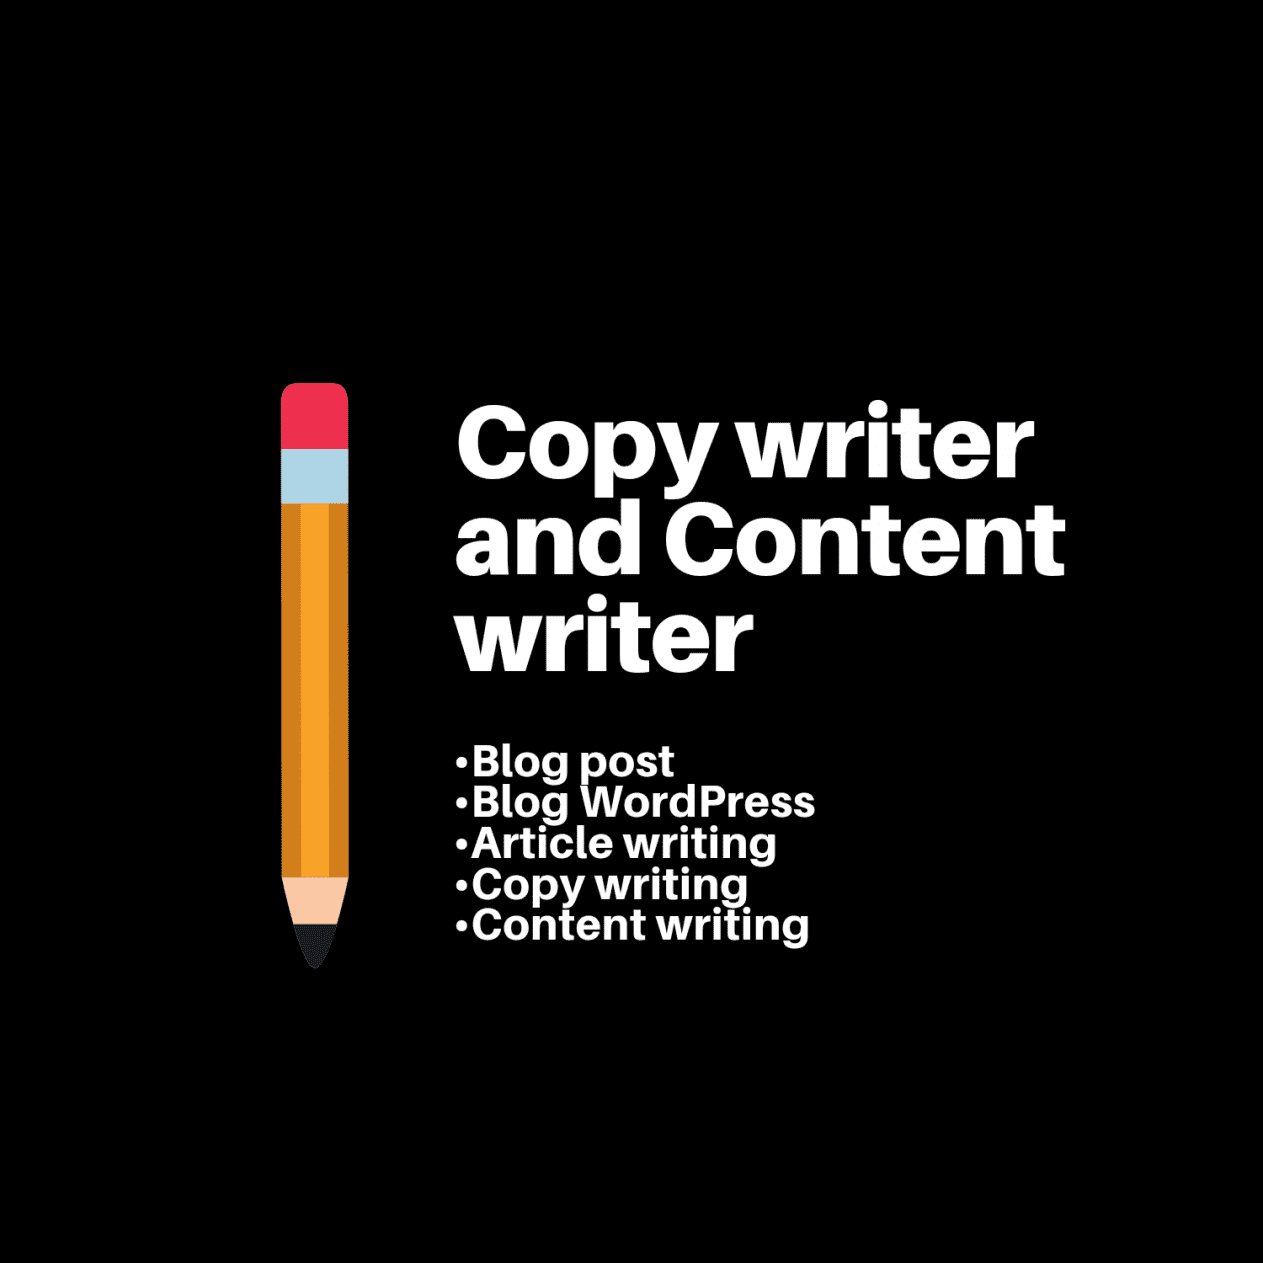 I write copies and contents for your business.